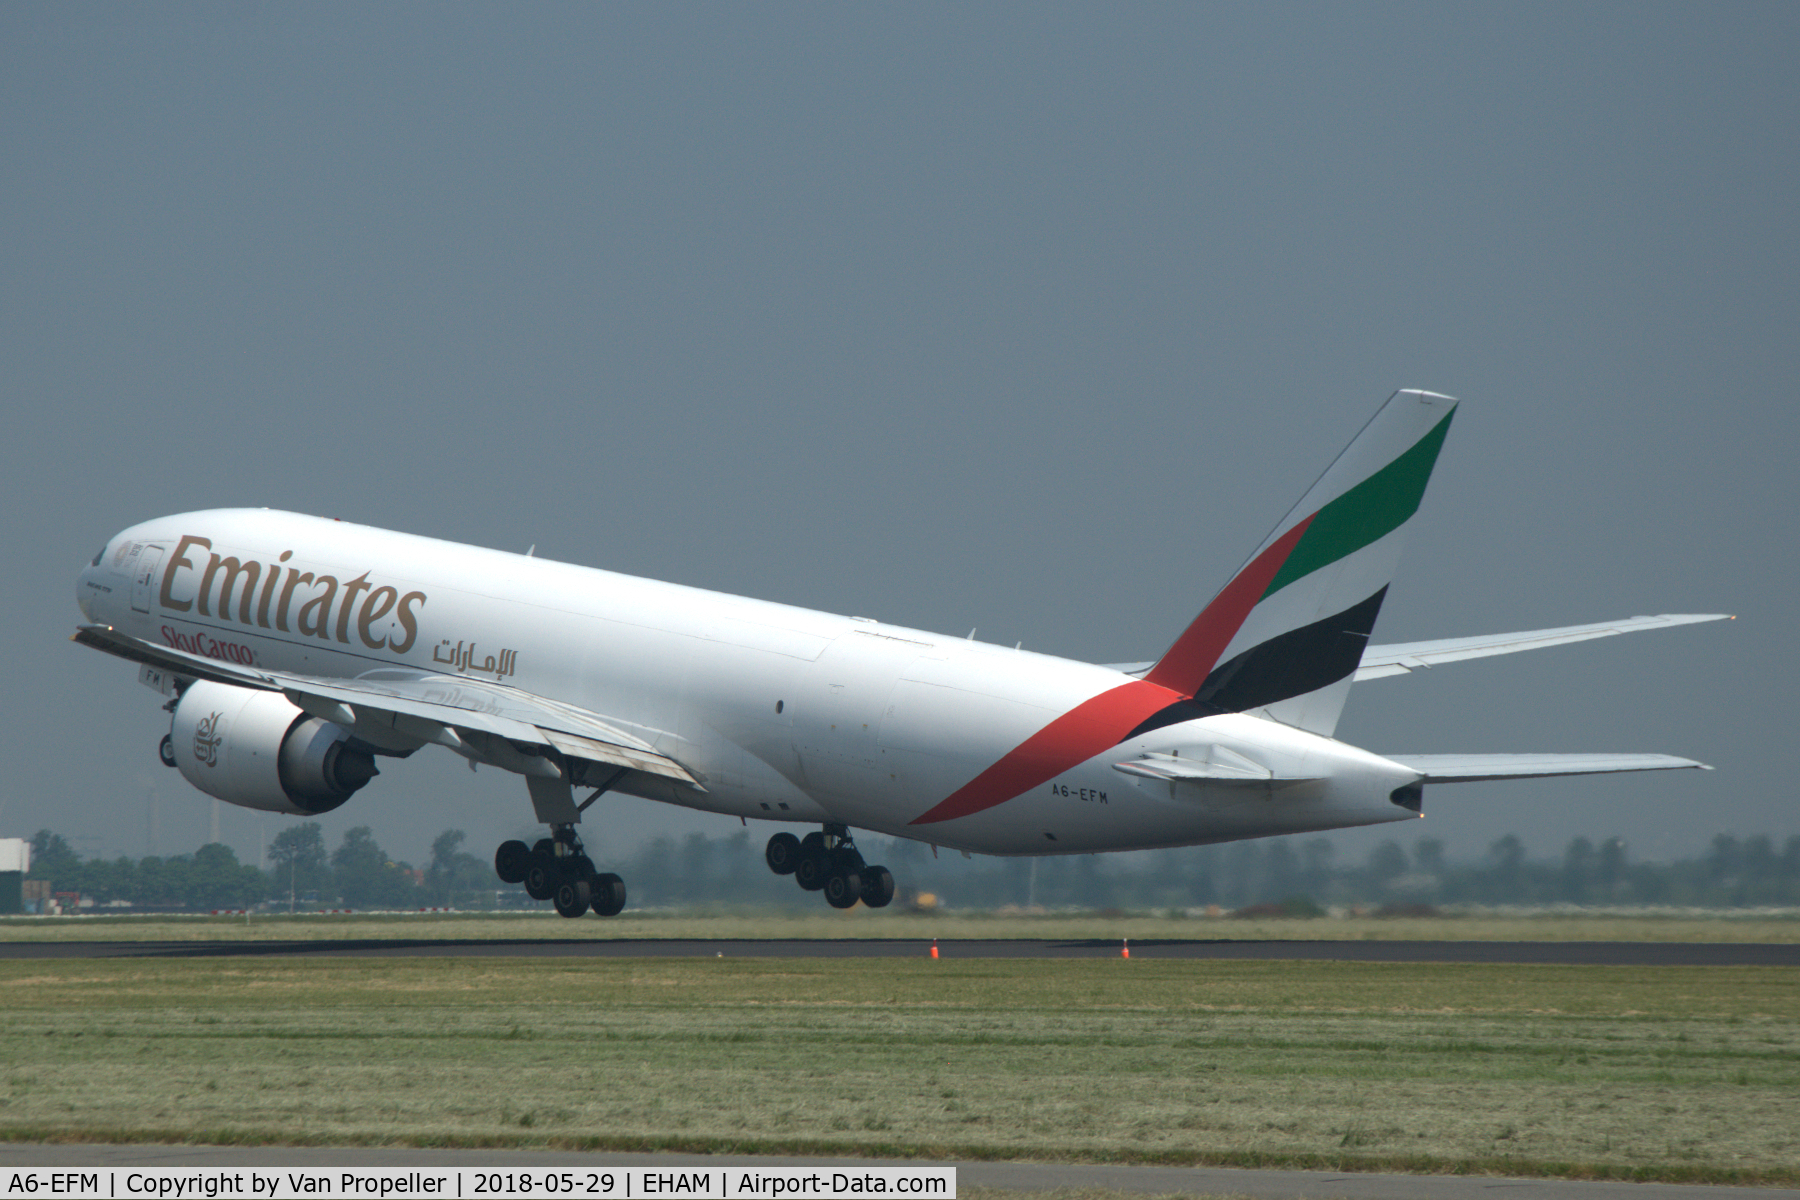 A6-EFM, 2013 Boeing 777-F1H C/N 42231, Emirates SkyCargo Boeing 777-F1H taking off from Schiphol airport, the Netherlands